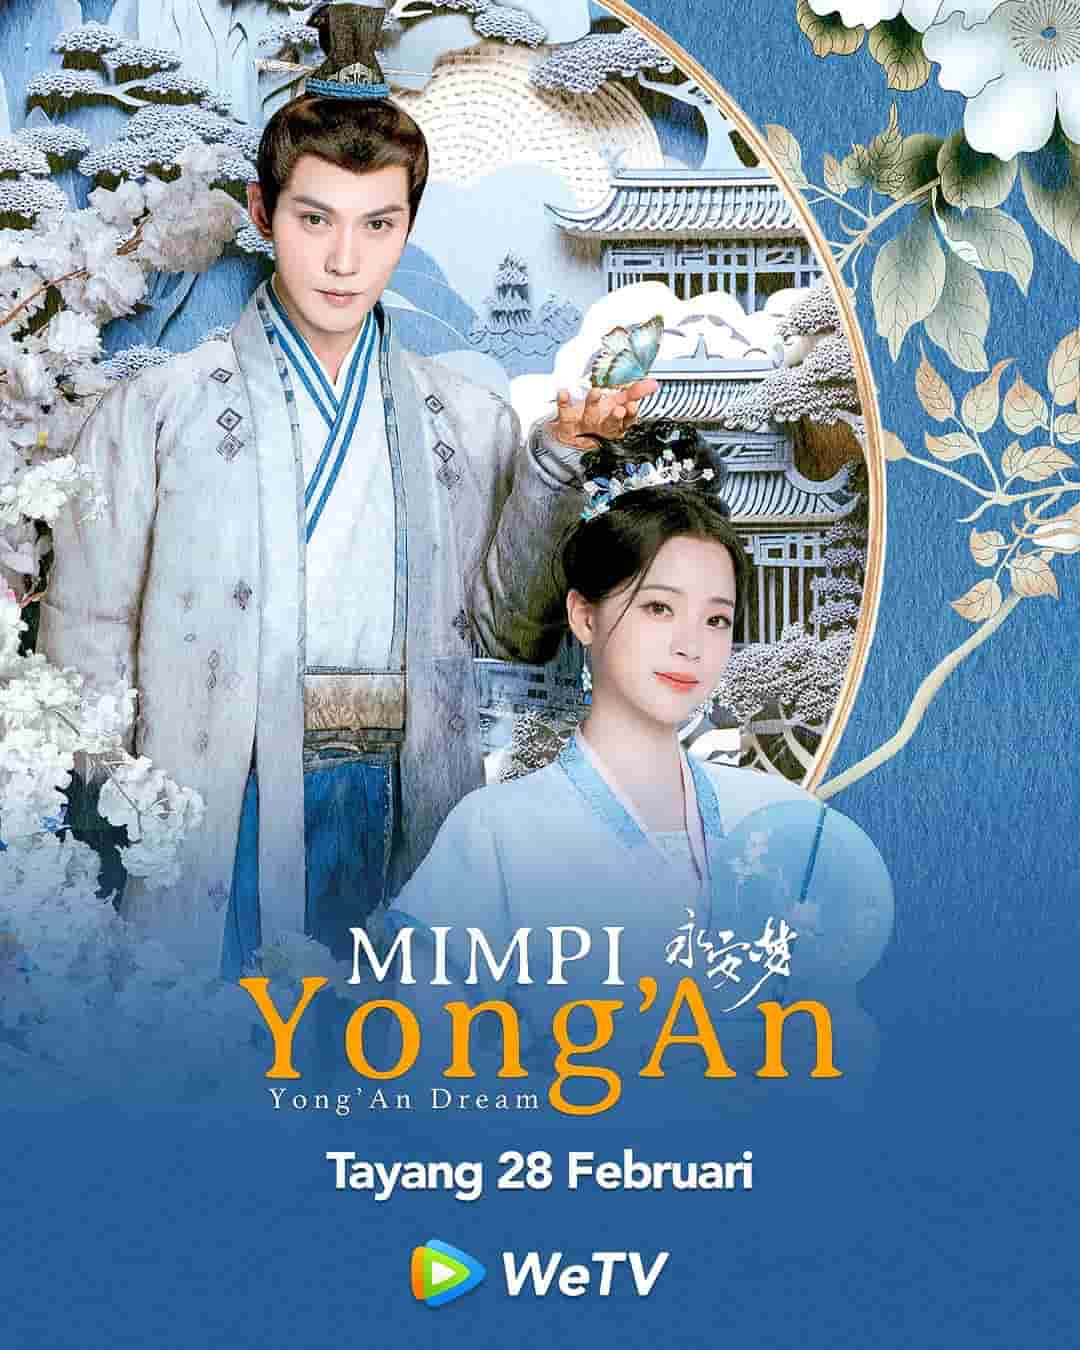 Yong’An Dream - Sinopsis, Pemain, OST, Episode, Review